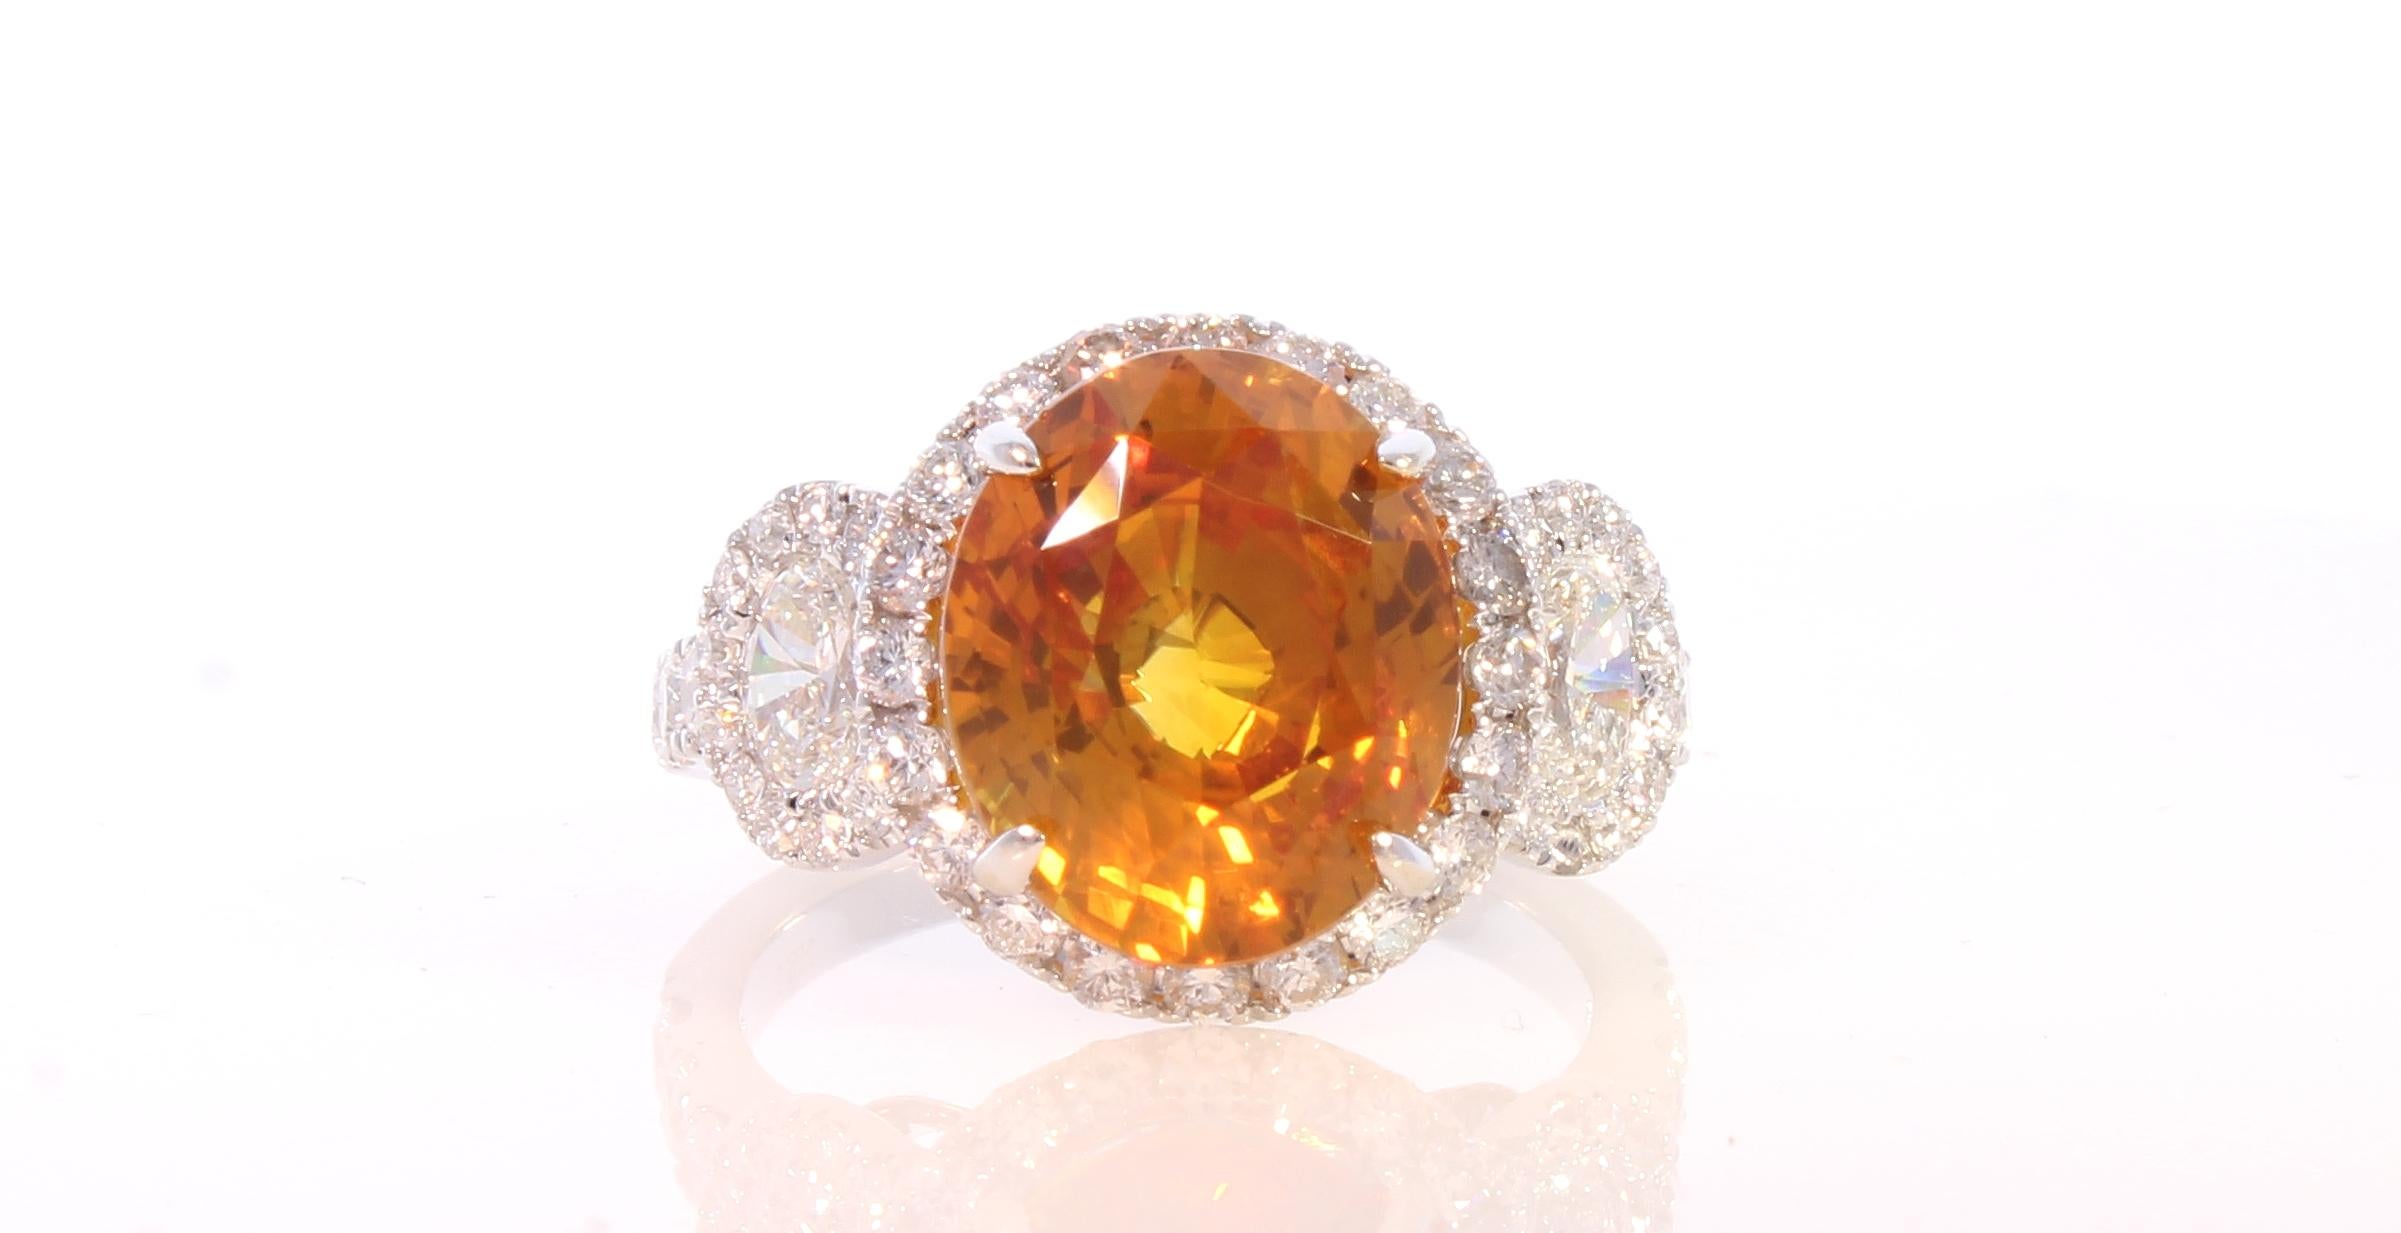 This EGL certified 6.60 carat vibrant orange sapphire, oval cut and prong set, is the star of this cocktail ring. The gem source is Sri Lanka; its color is vivid orange, its transparency and luster are excellent. It measures 11.42x9.57x6.96mm. 2